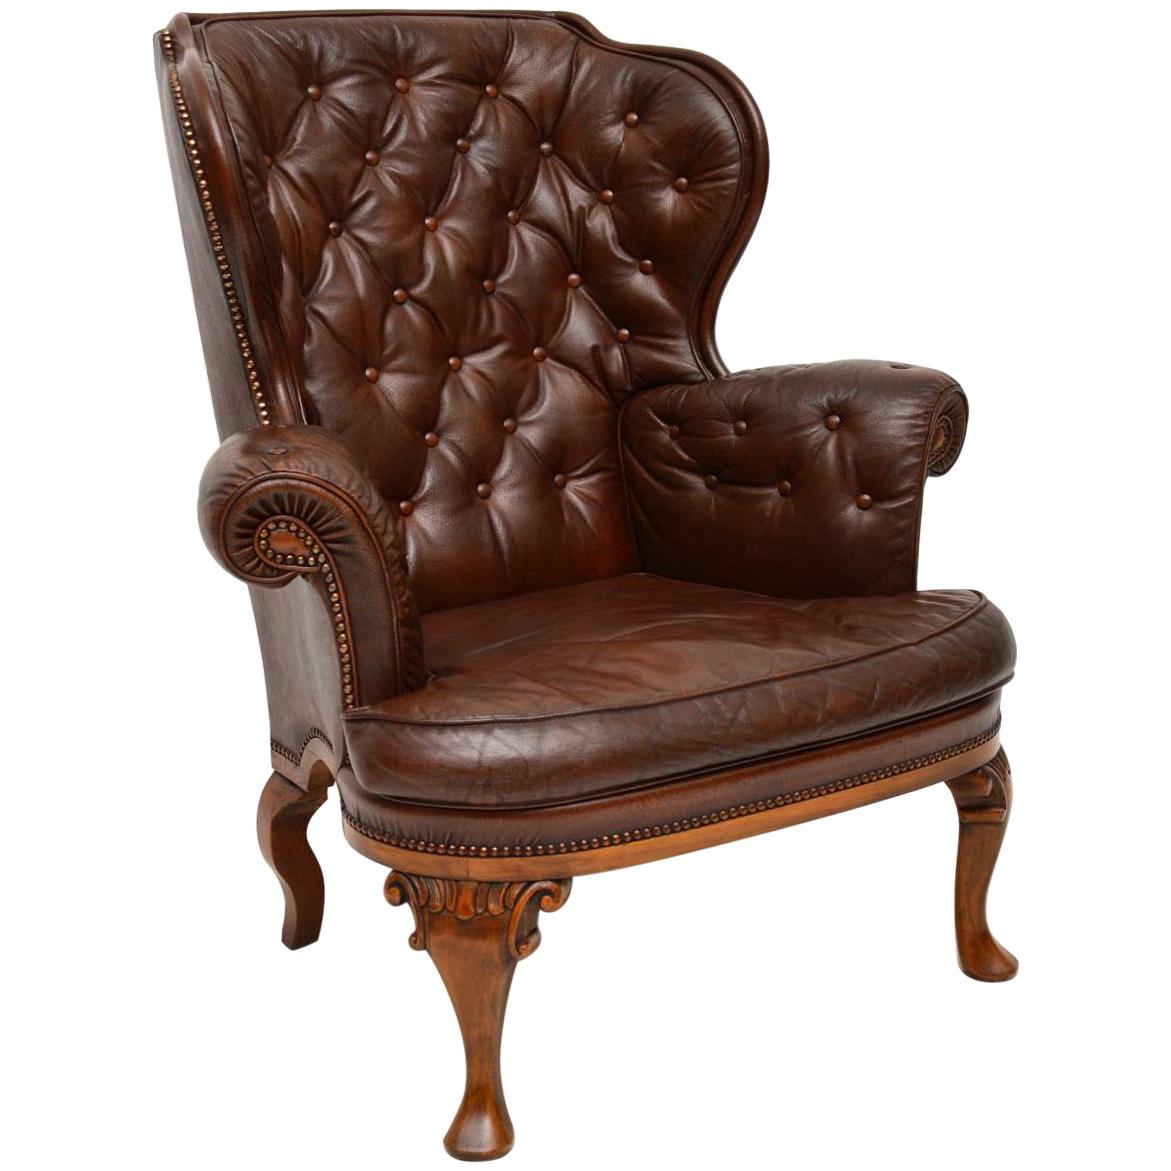 Antique Swedish Leather Wing Back Armchair